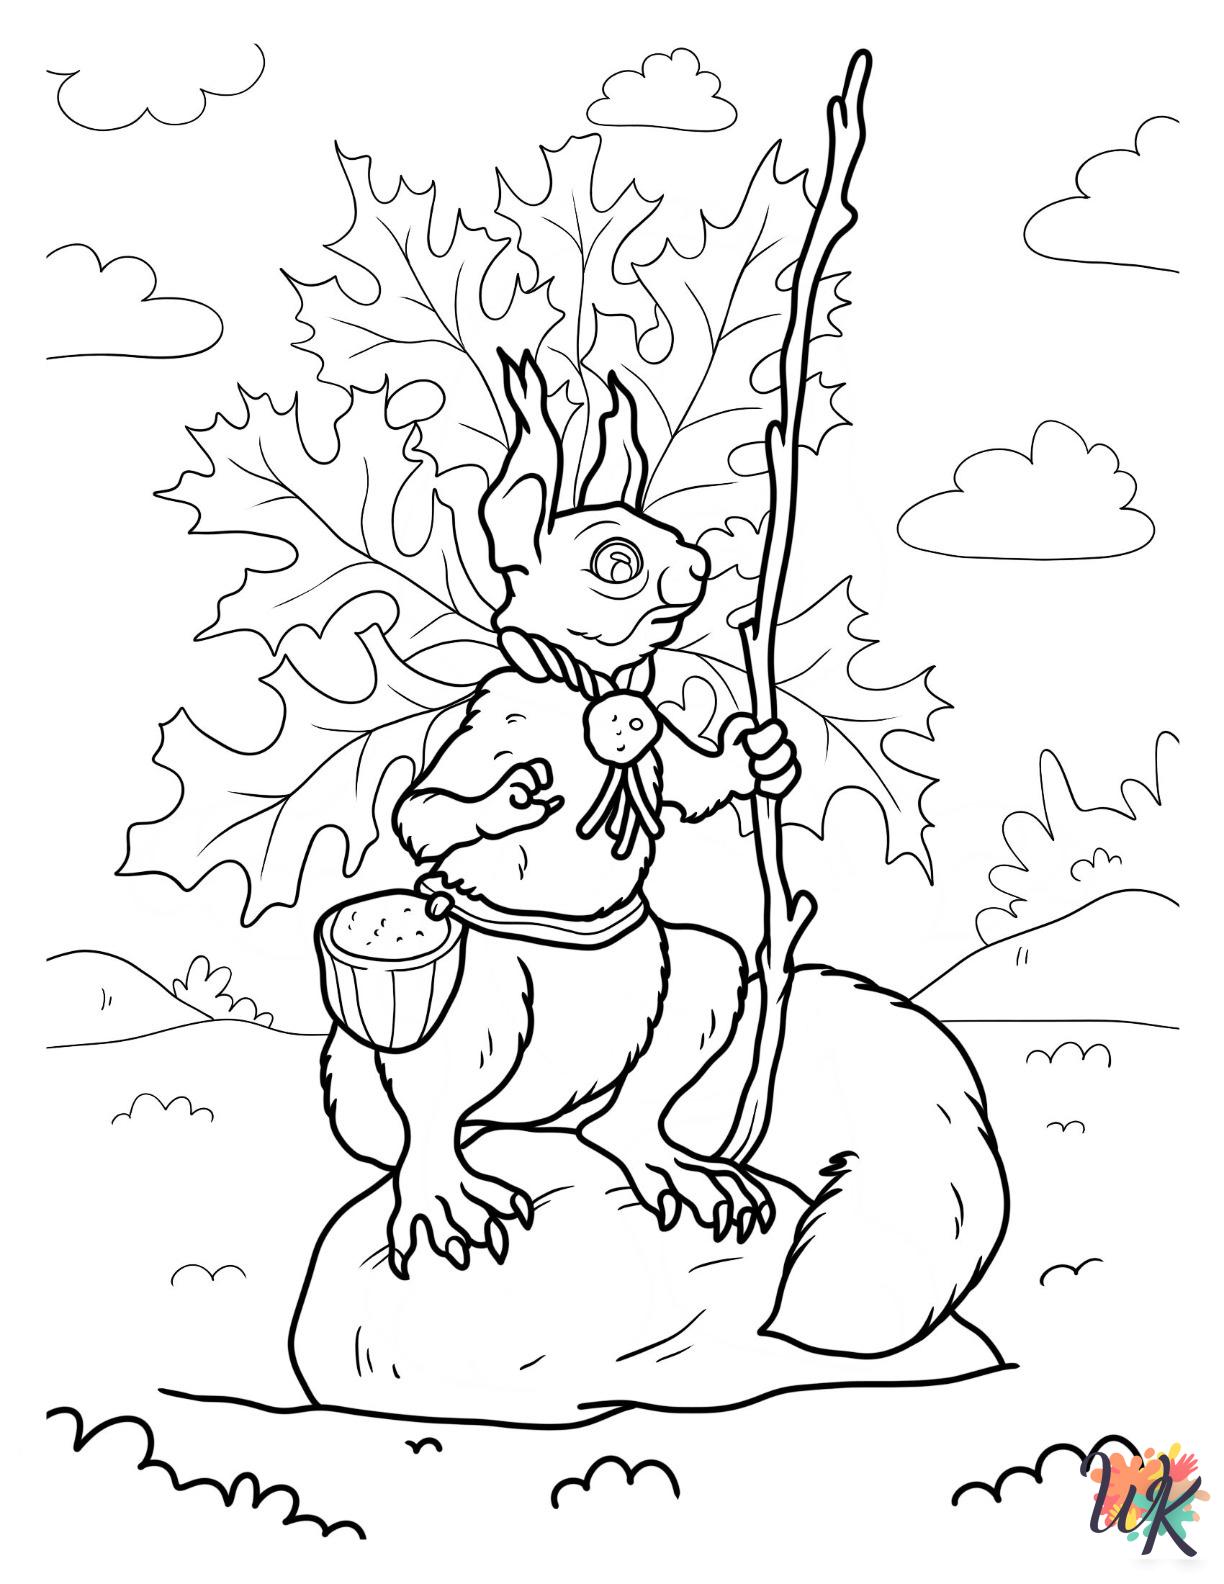 detailed Squirrel coloring pages for adults 1